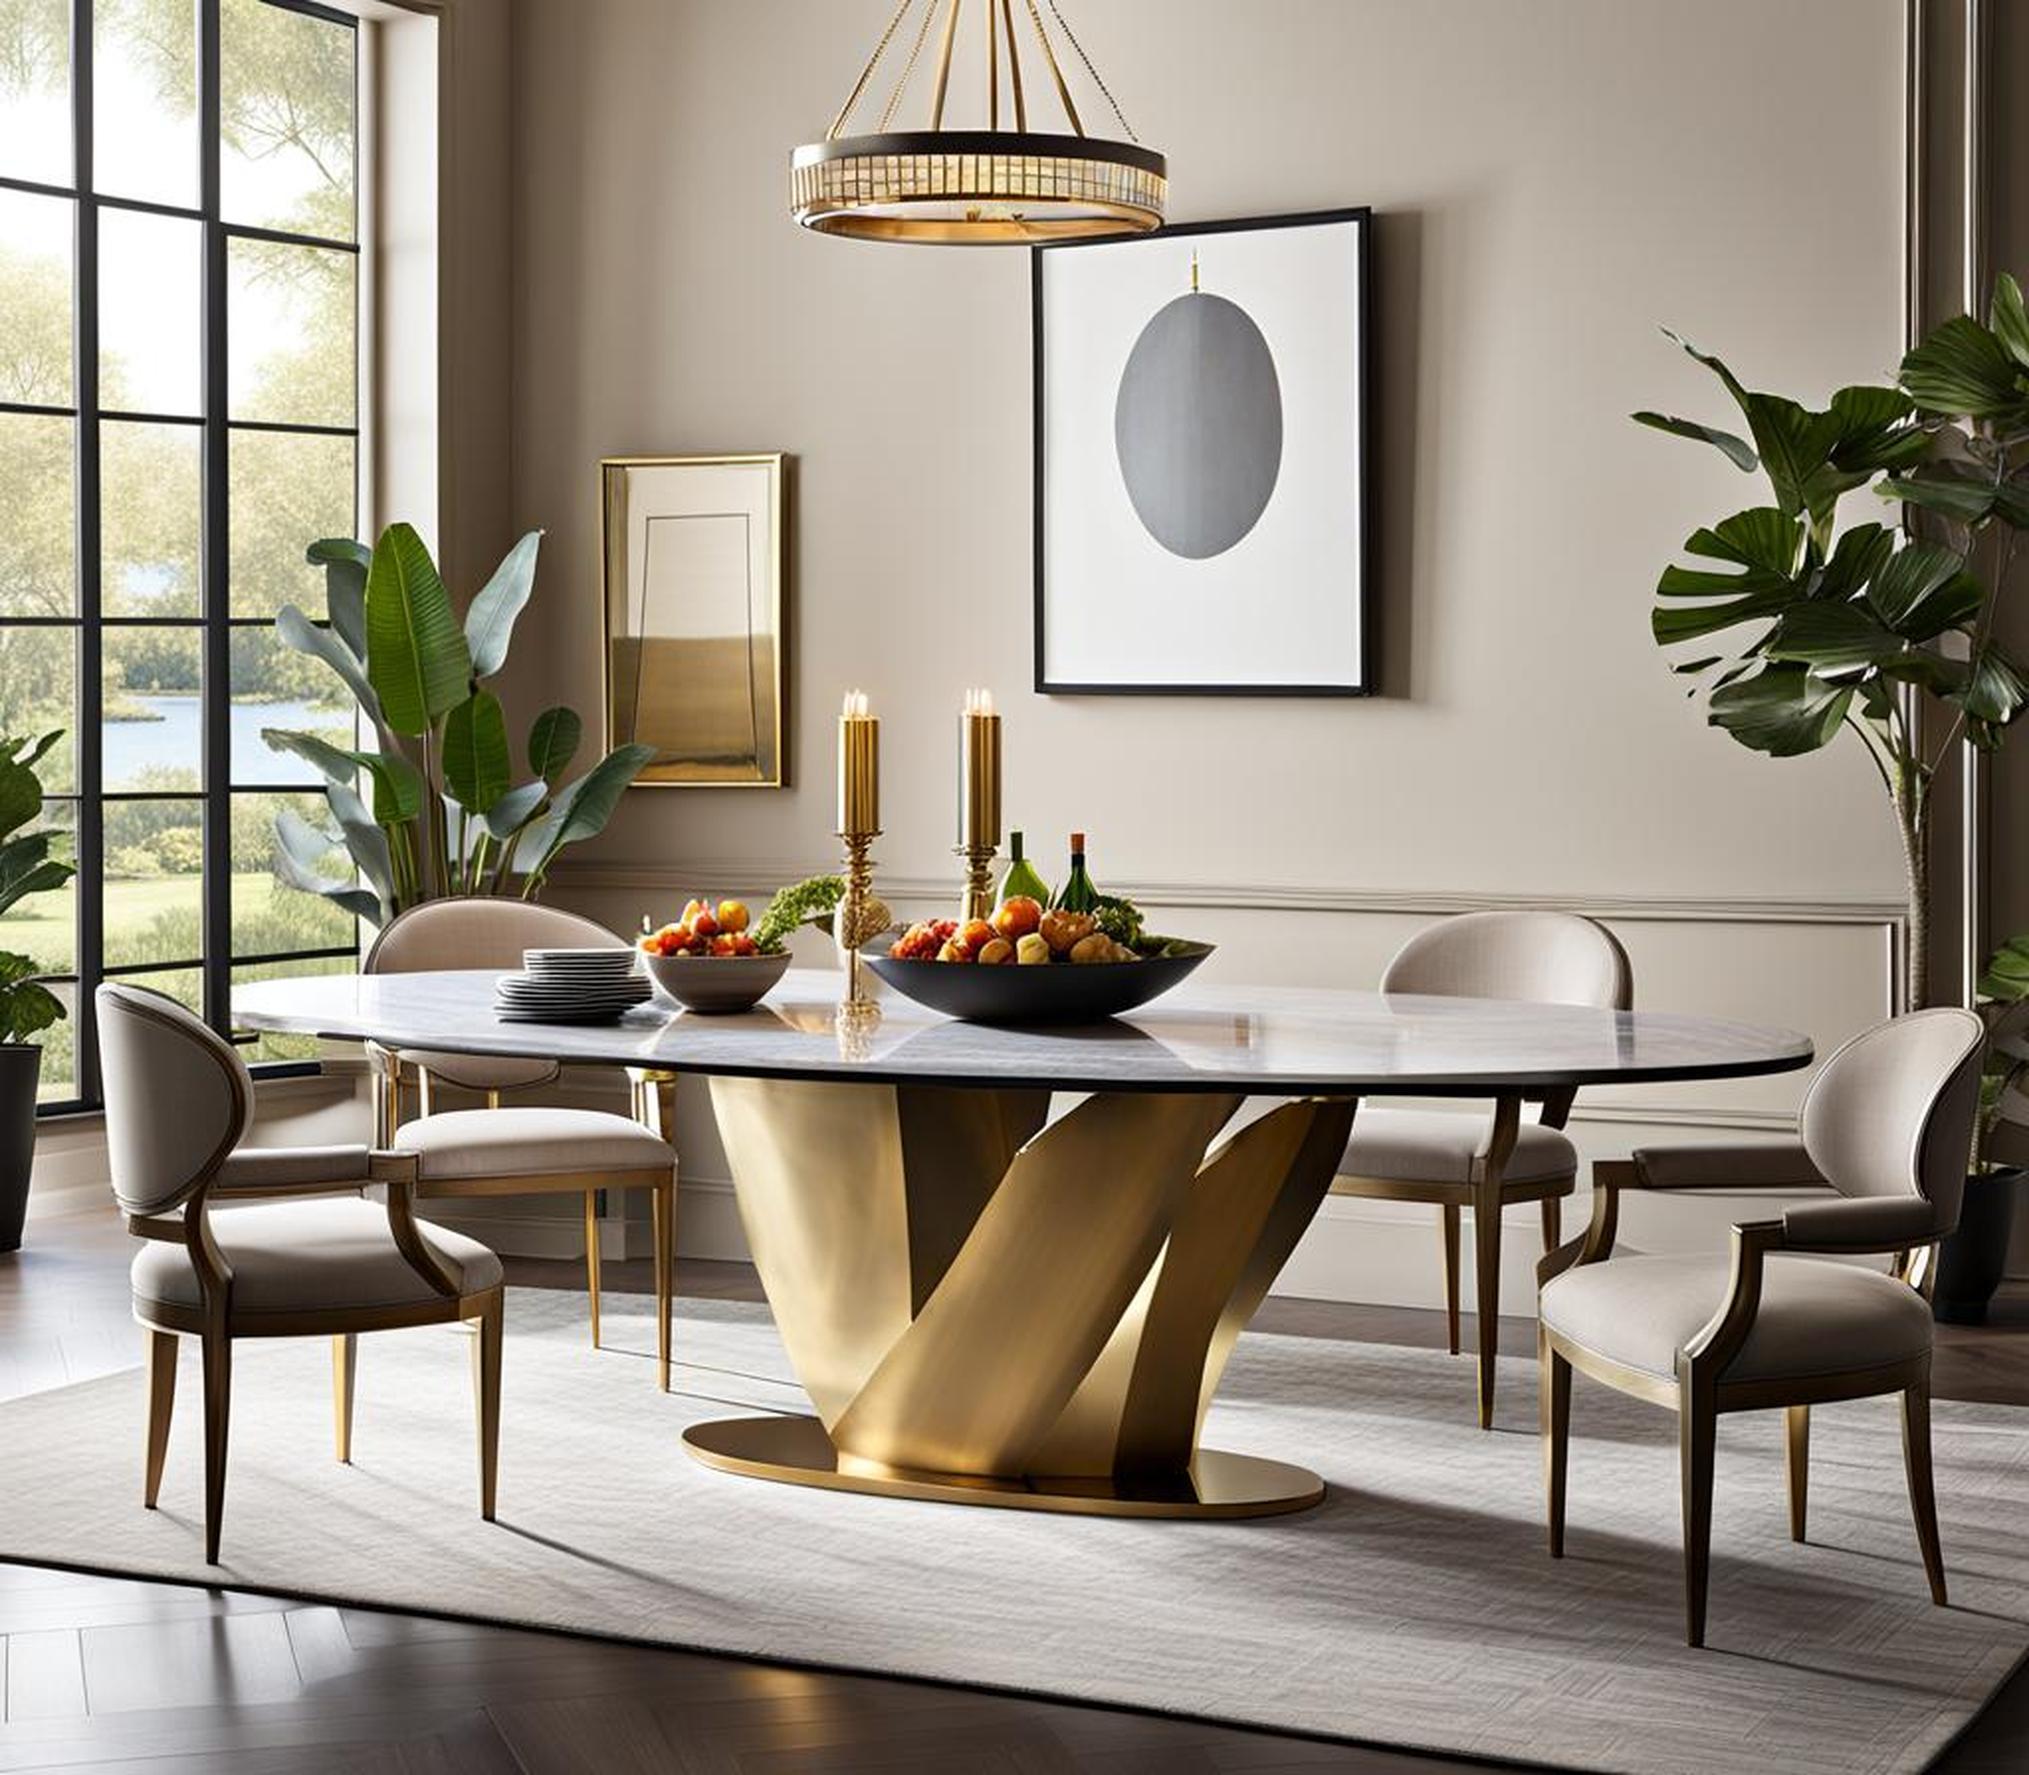 Anchor Your Dining Room with the Dramatic Sonali Oval Table